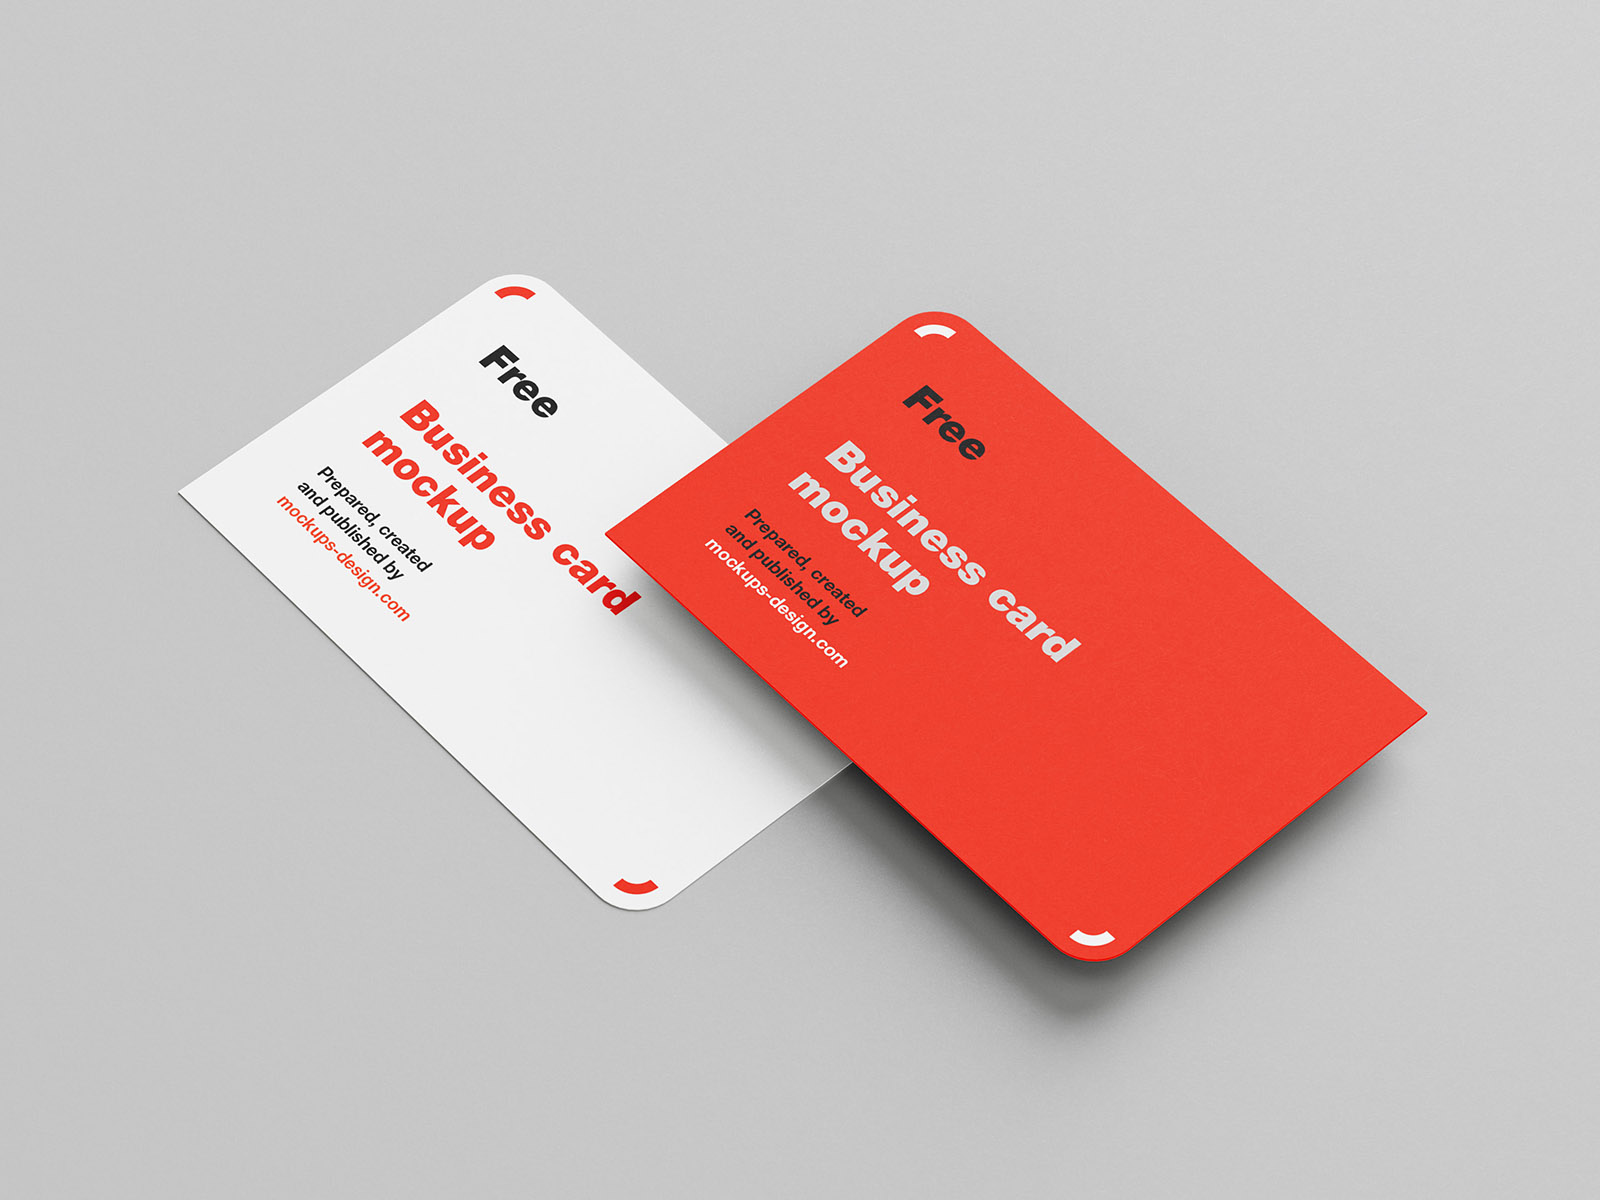 6 Free Rounded Corners Business Card Mockup PSD Files